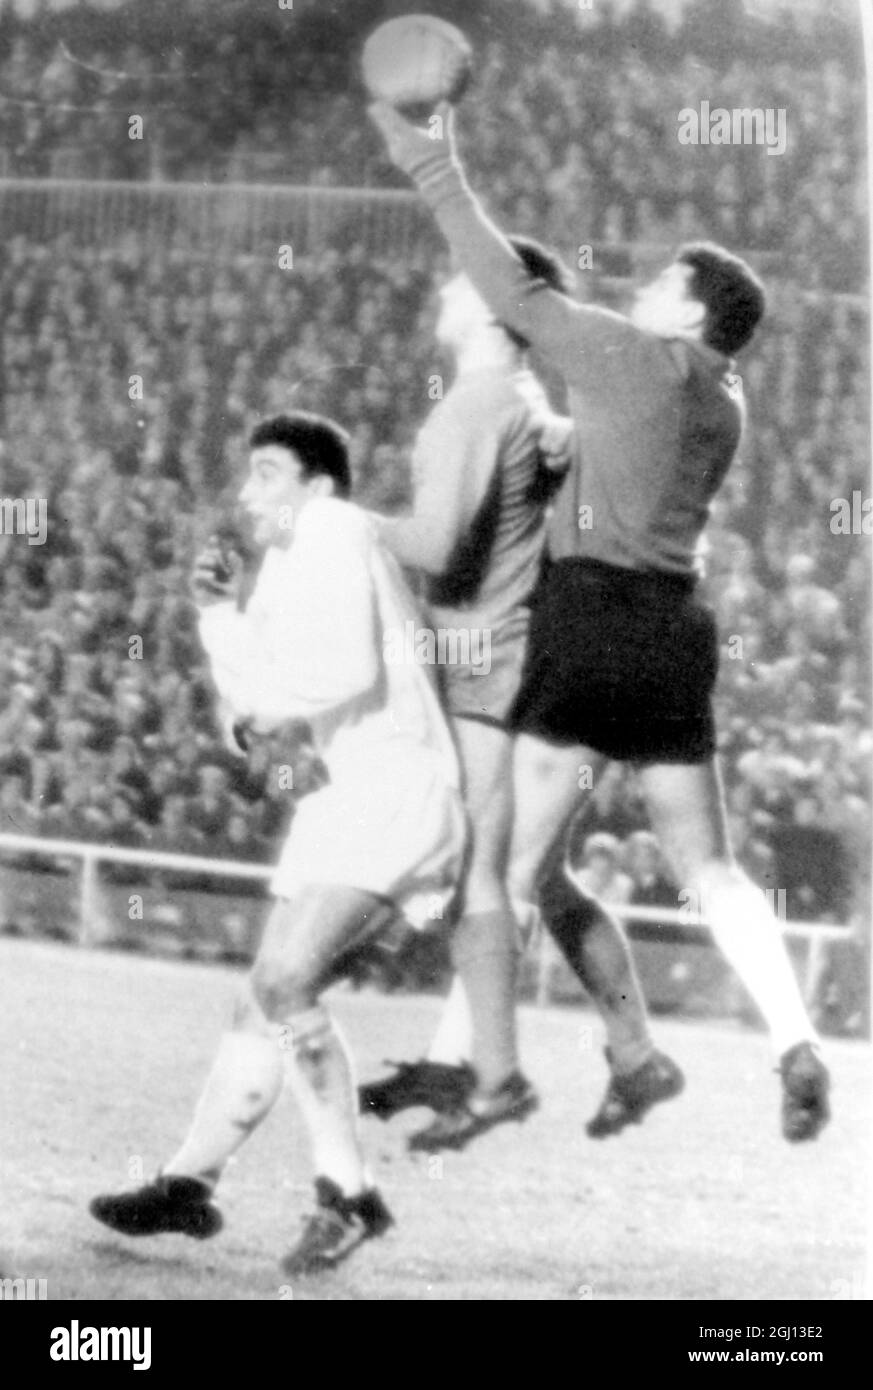 FOOTBALL EUROPEAN CUP LEIGE V REAL MADRID NOCOLAY GRABS BALL 22 MARCH 1962 Stock Photo